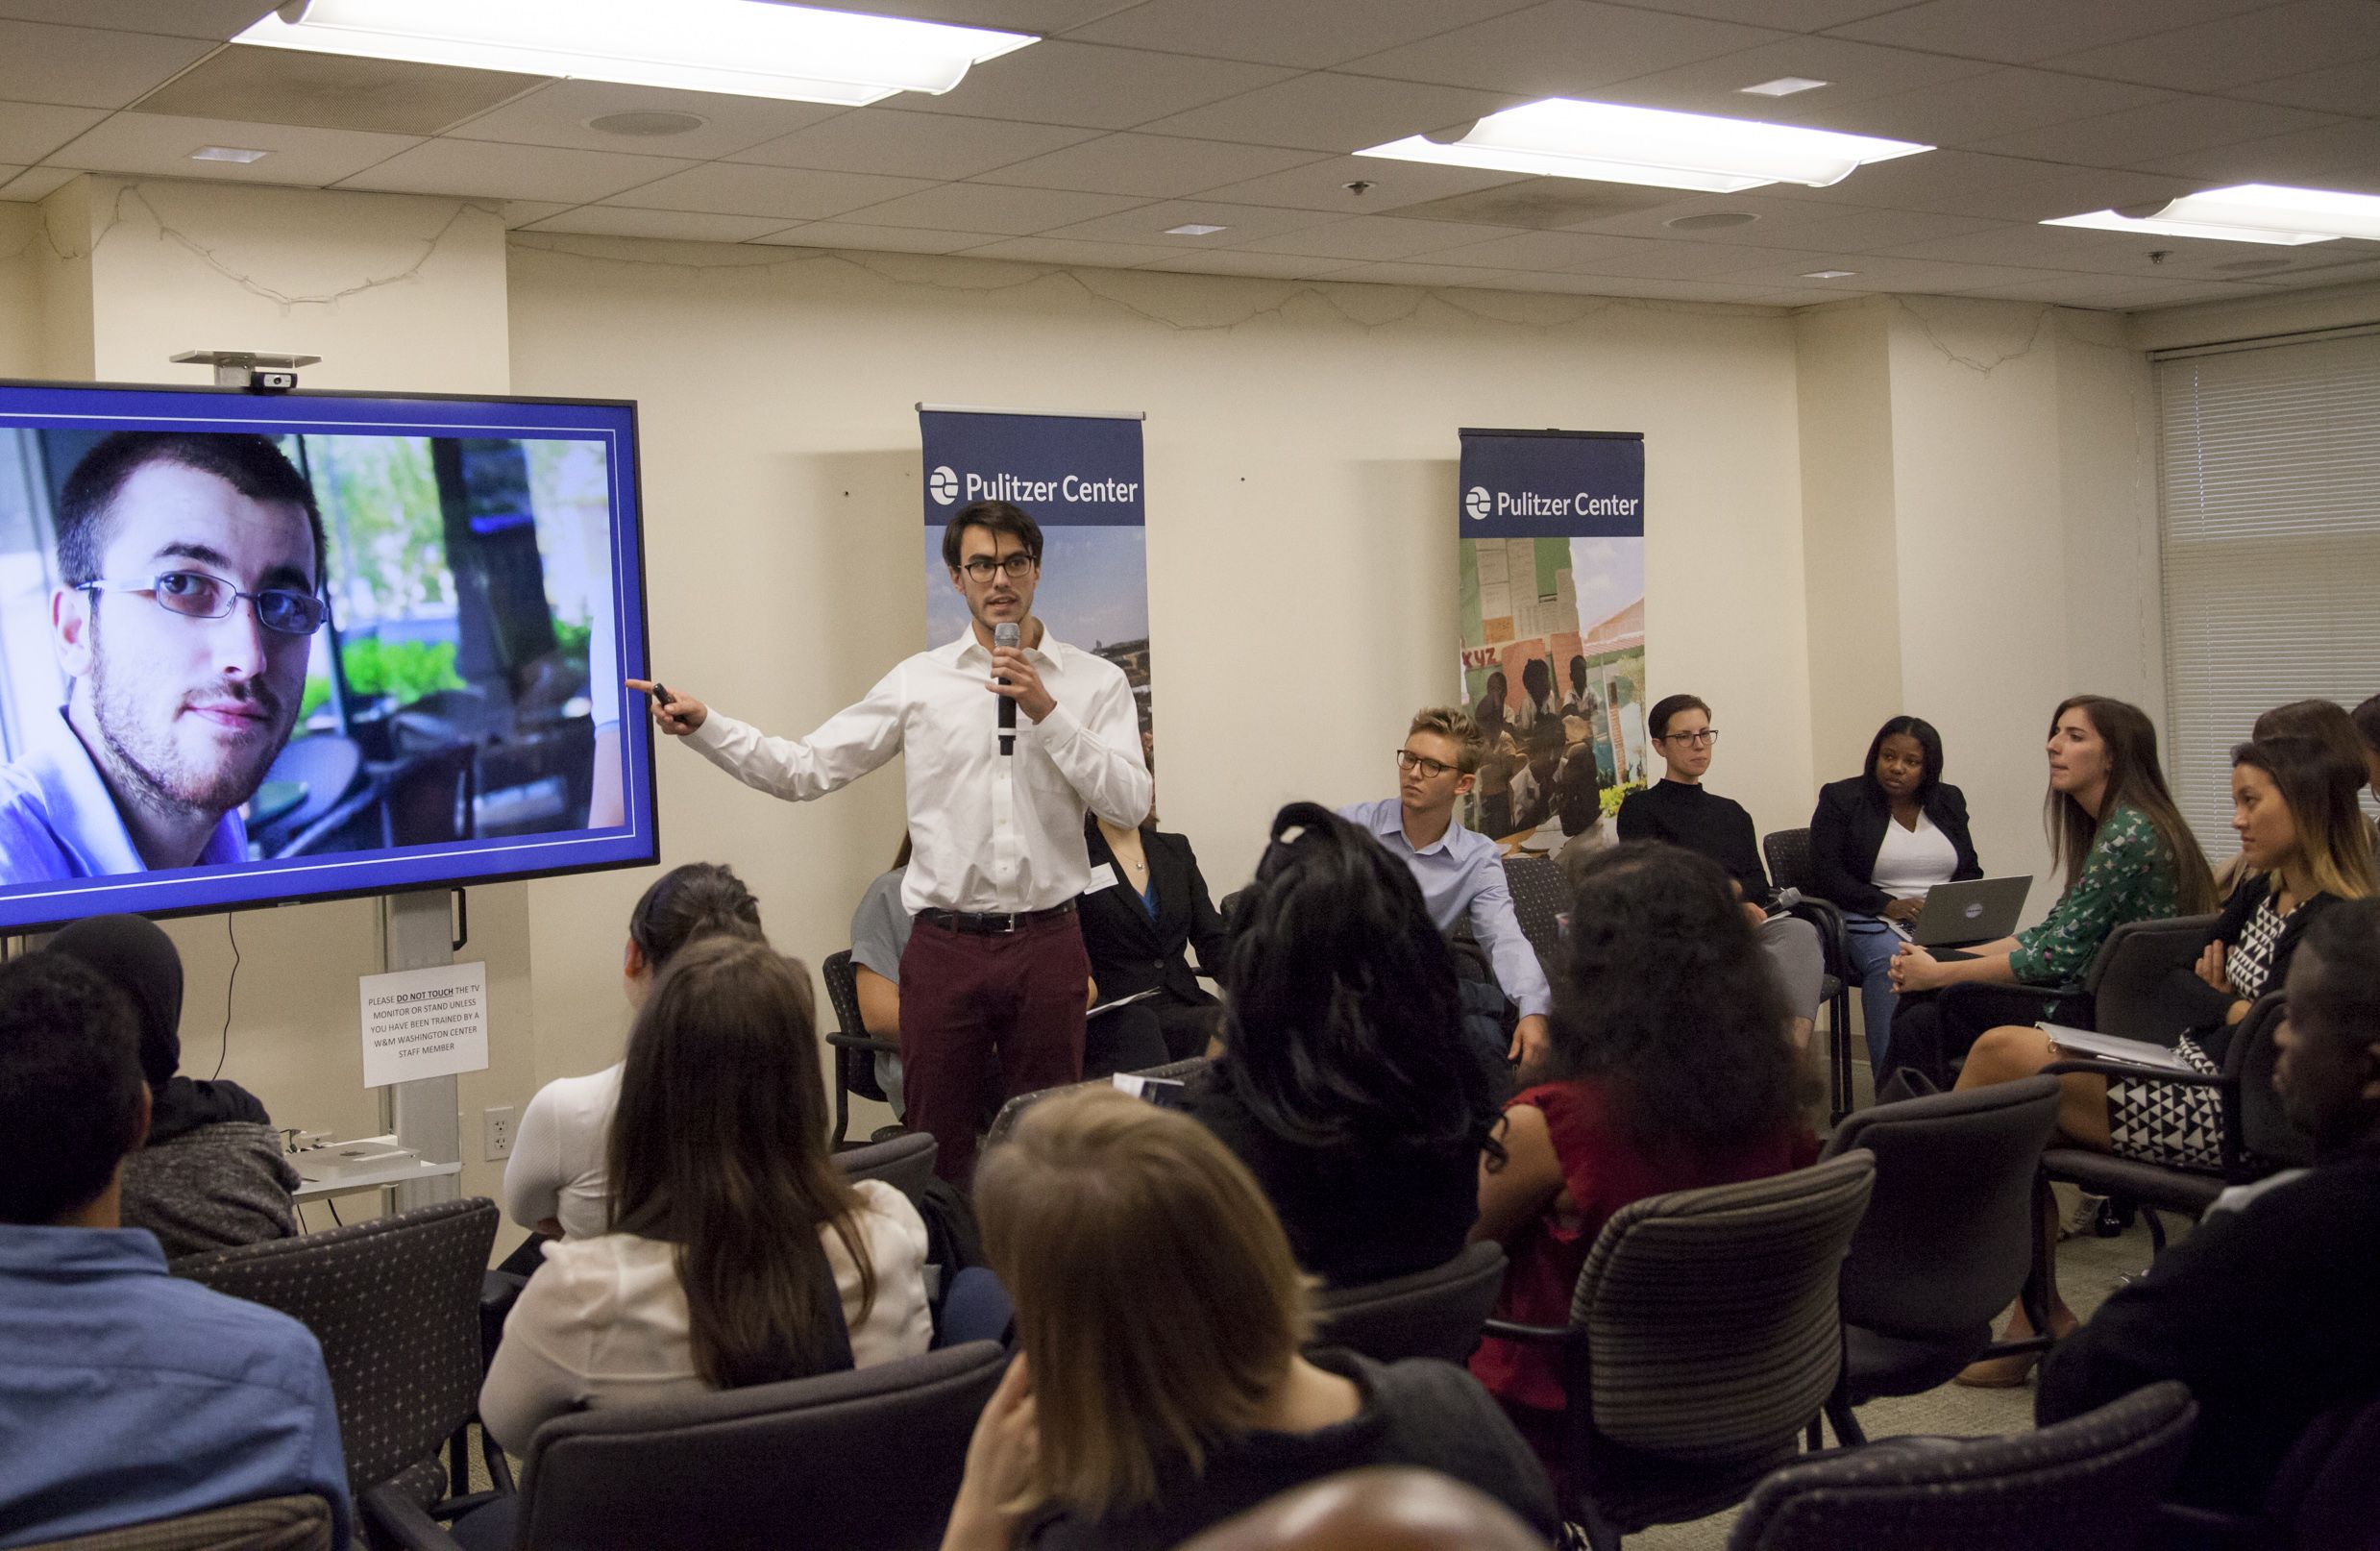 AJ Naddaff (Davidson College) presents his global reporting project at Washington Weekend. Image by Jin Ding. United States, 2018.